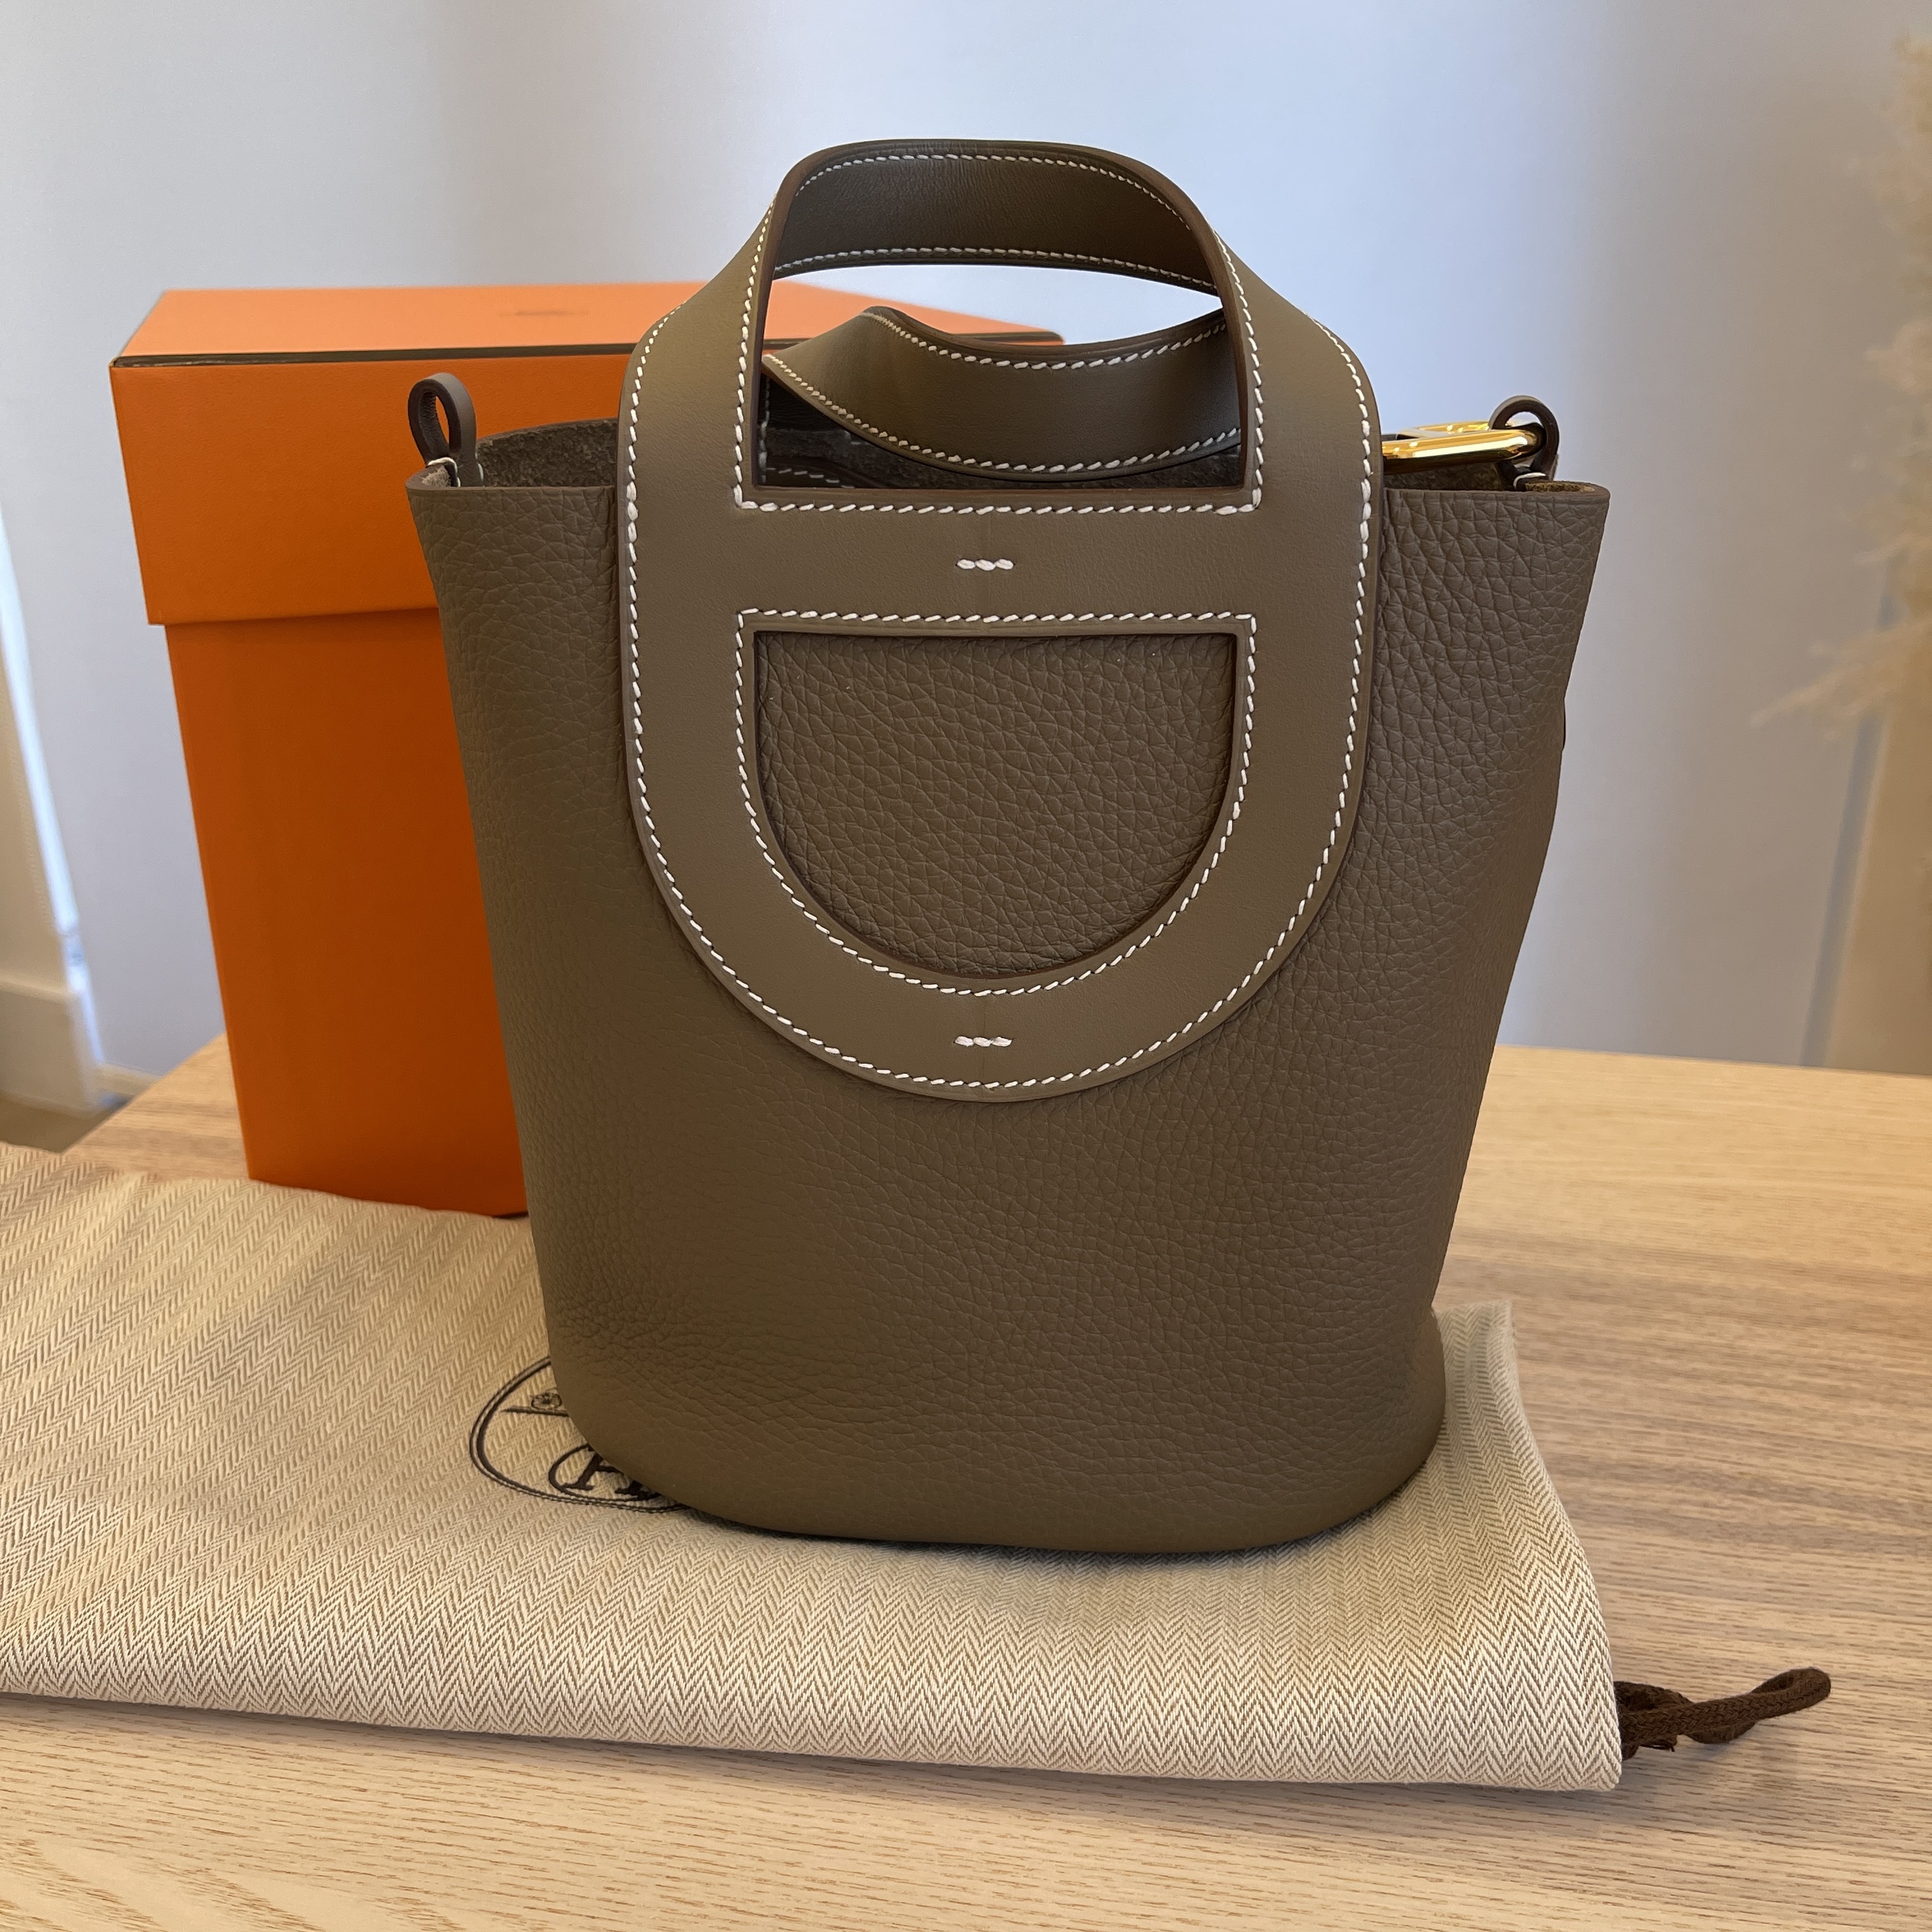 Hermes In-The-Loop bag 18 Etoupe grey Clemence leather/Swift